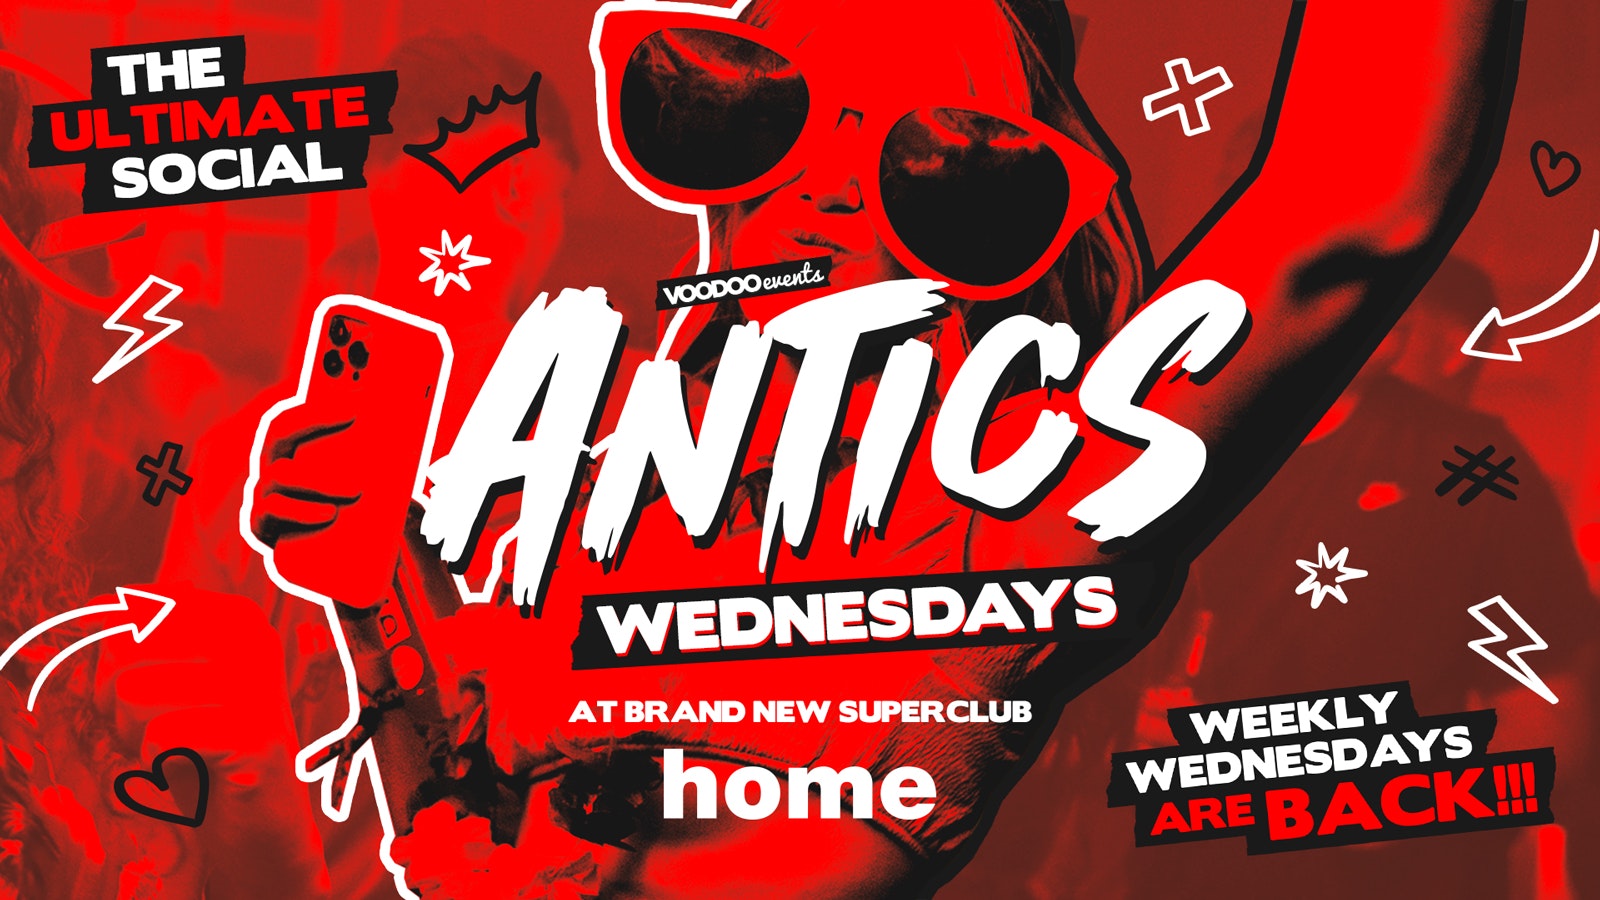 Antics @ THE BRAND NEW SUPER CLUB HOME – Wednesday 8th May